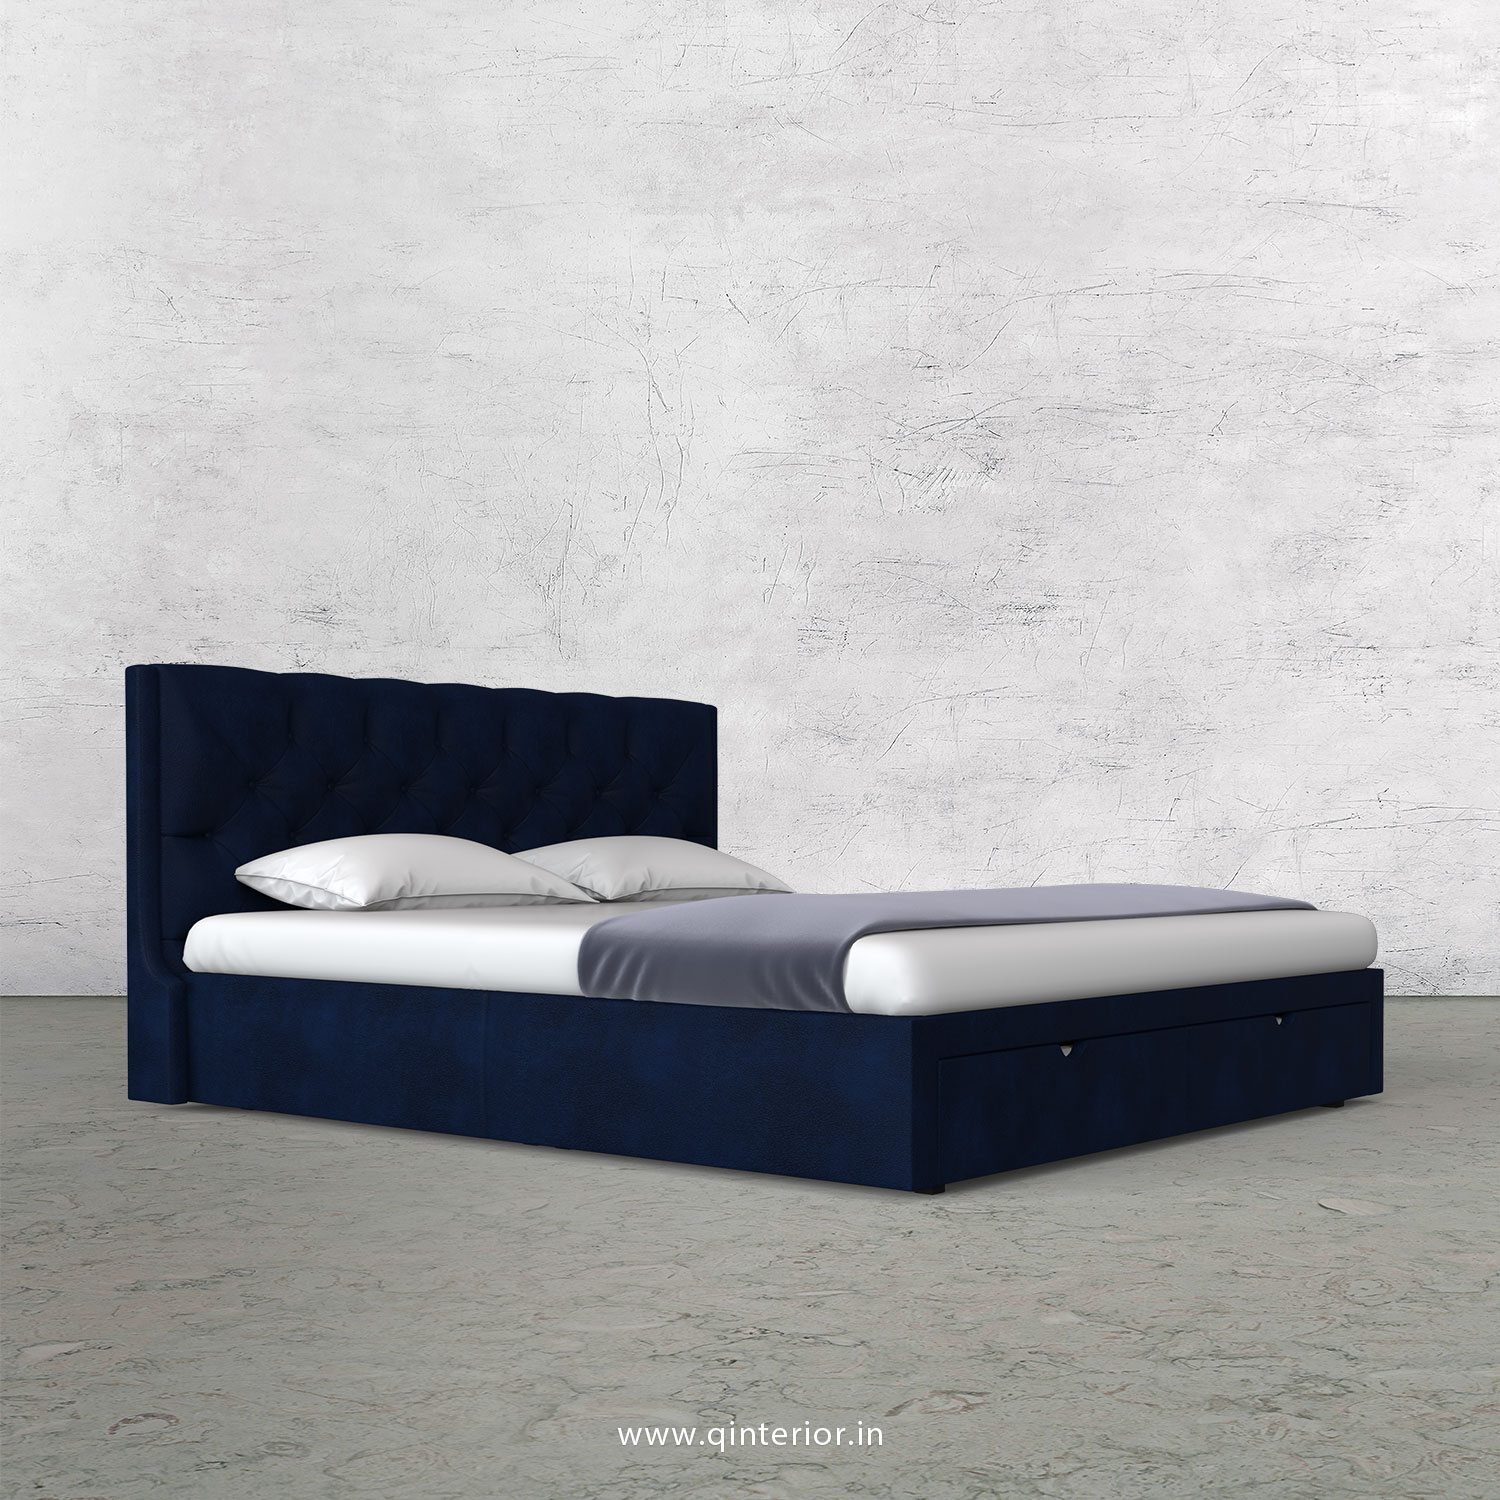 Scorpius King Size Storage Bed in Fab Leather Fabric - KBD001 FL13